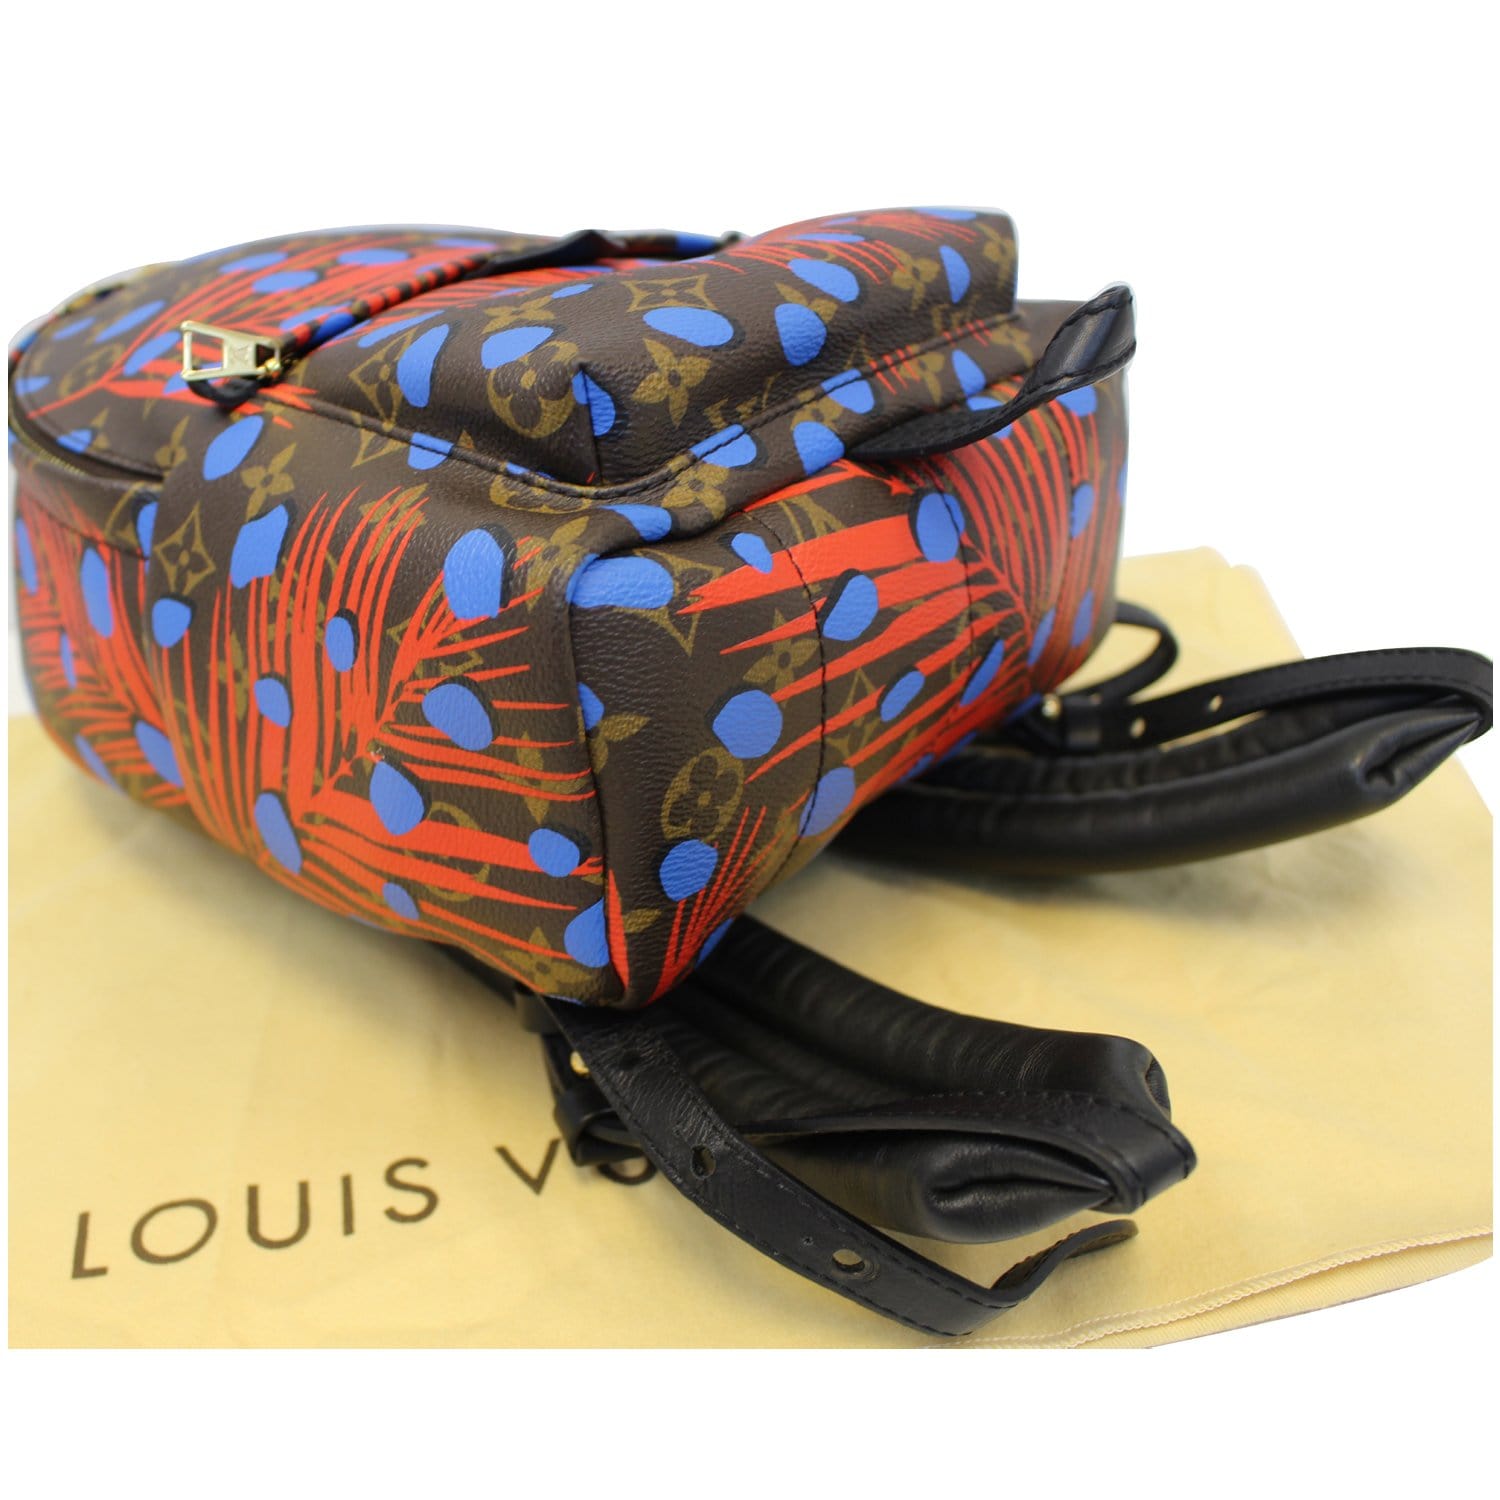 Authentic LOUIS VUITTON Palm Springs Backpack PM Mono Jungle Dot limited  edition